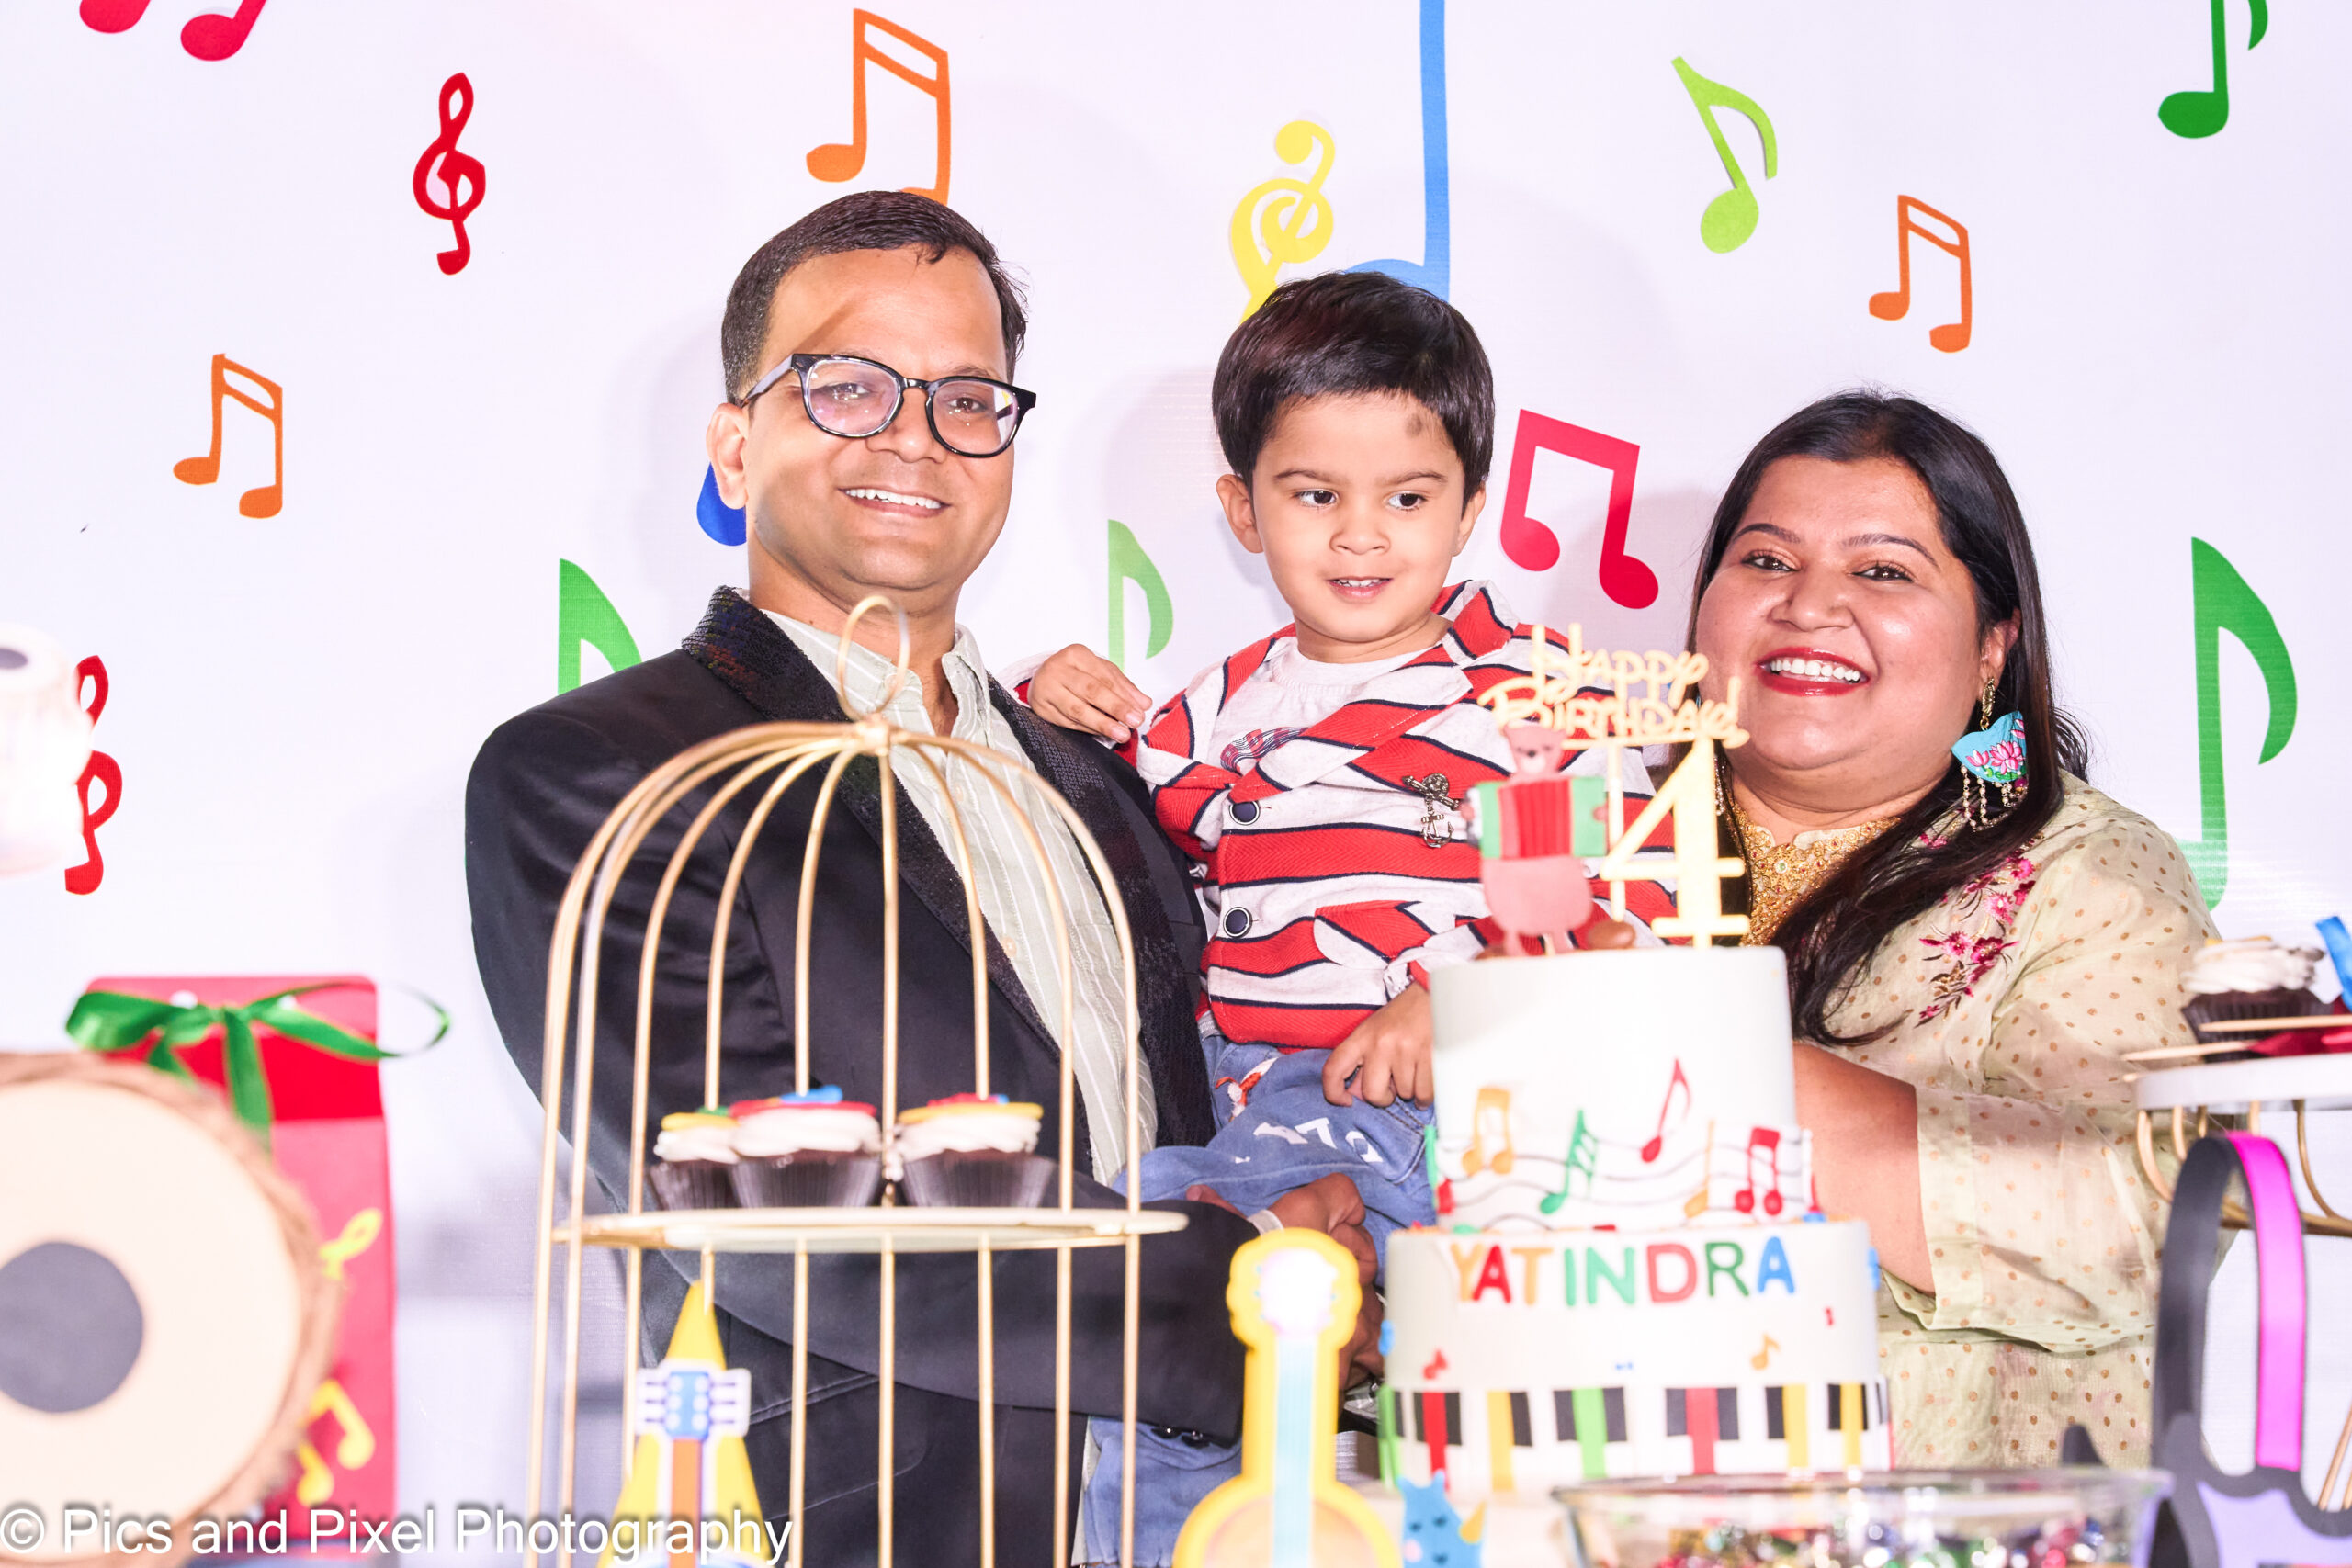 Music themed Birthday Images